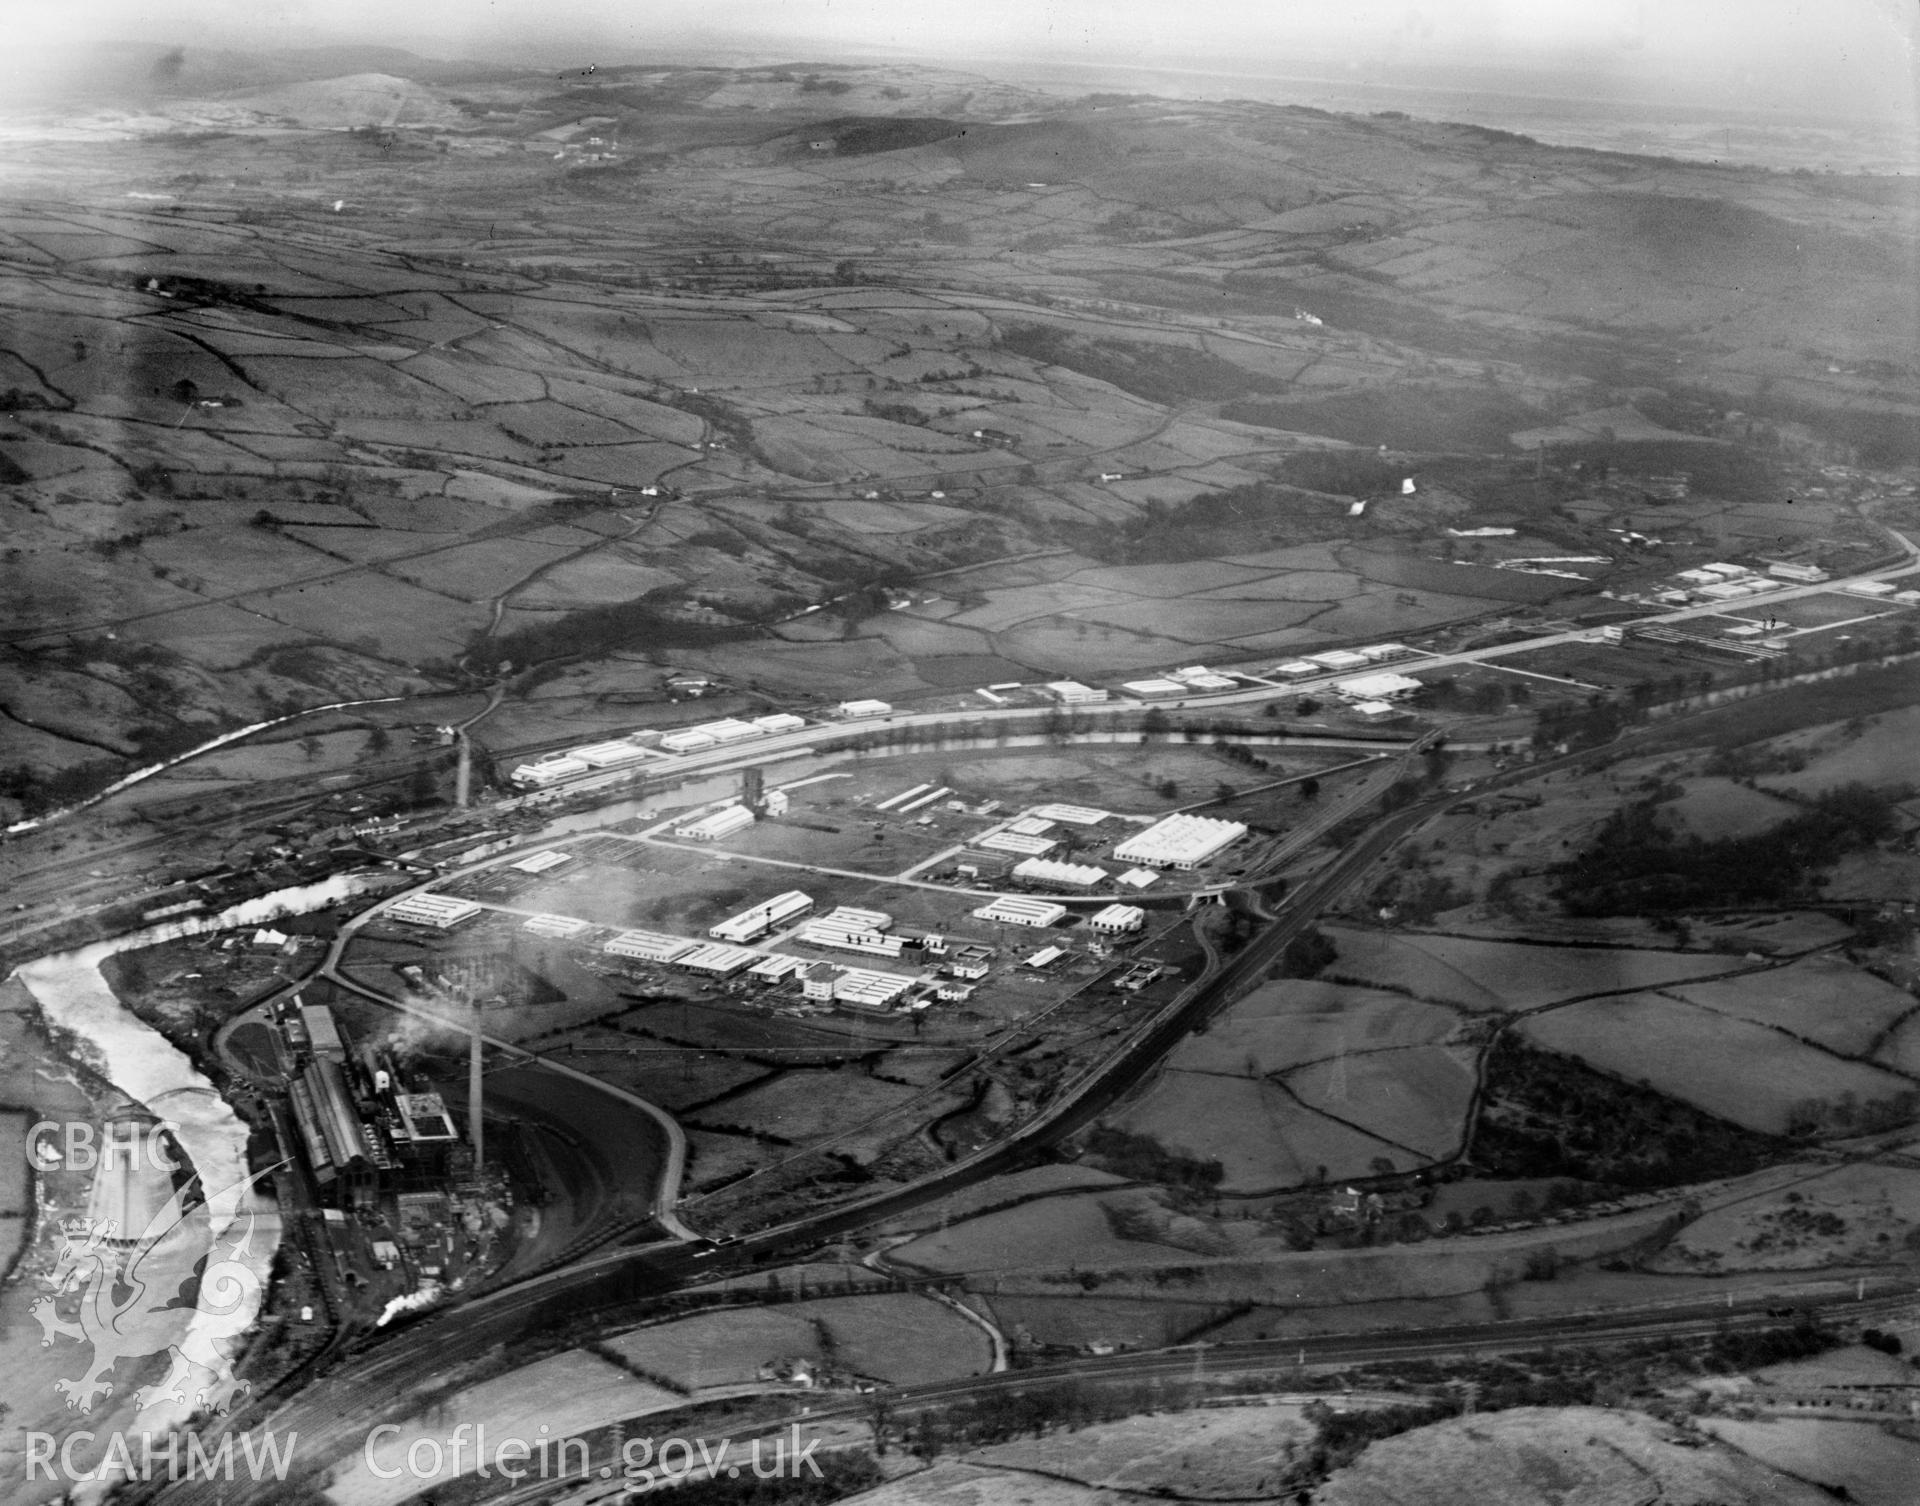 View of Pritchard, Wood & Partners, Treforest Trading Estate, oblique aerial view. 5?x4? black and white glass plate negative.